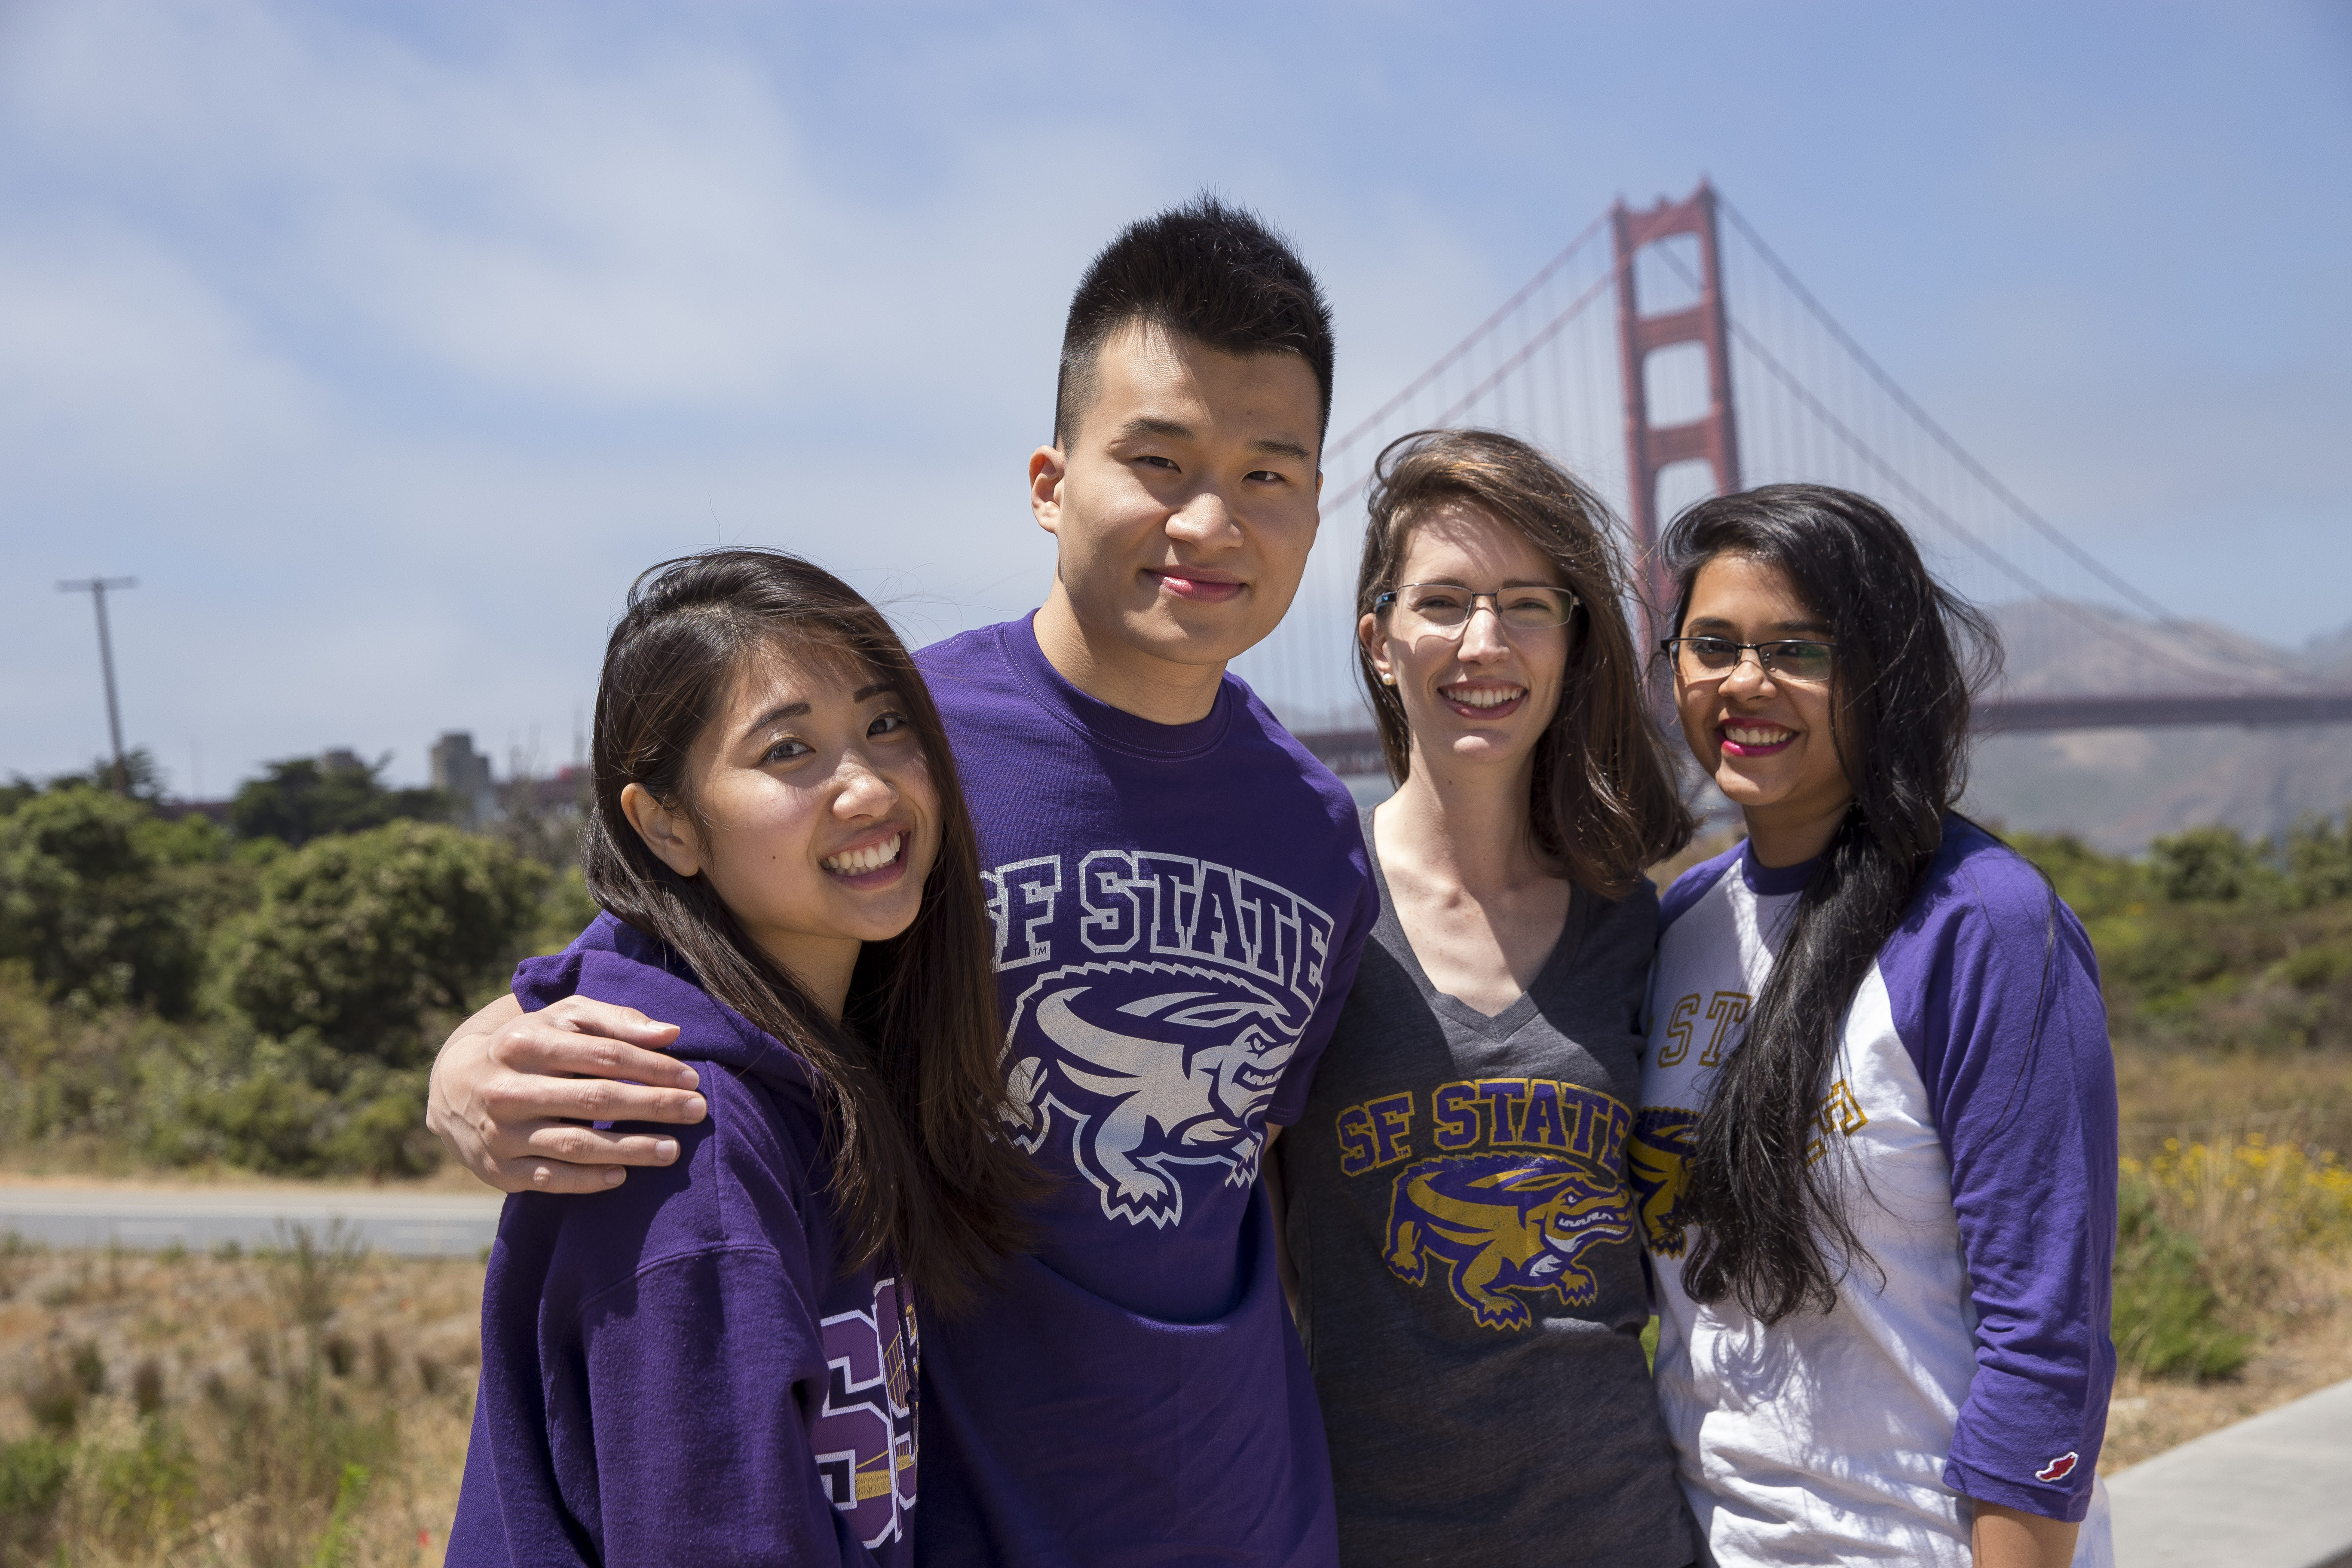 Students wearing SF State tshirts